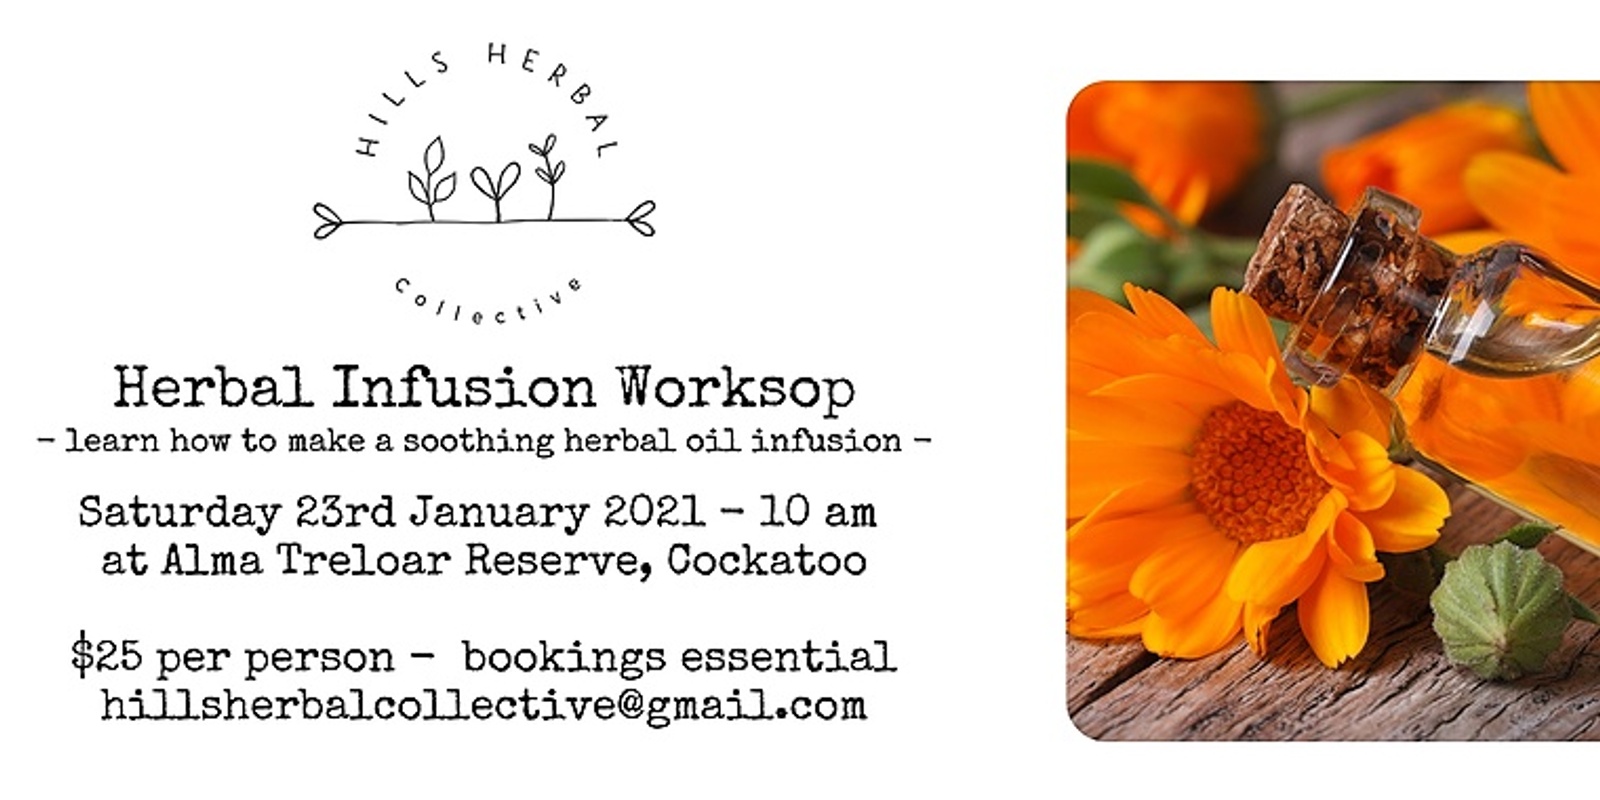 Banner image for HHC herbal infusion workshop